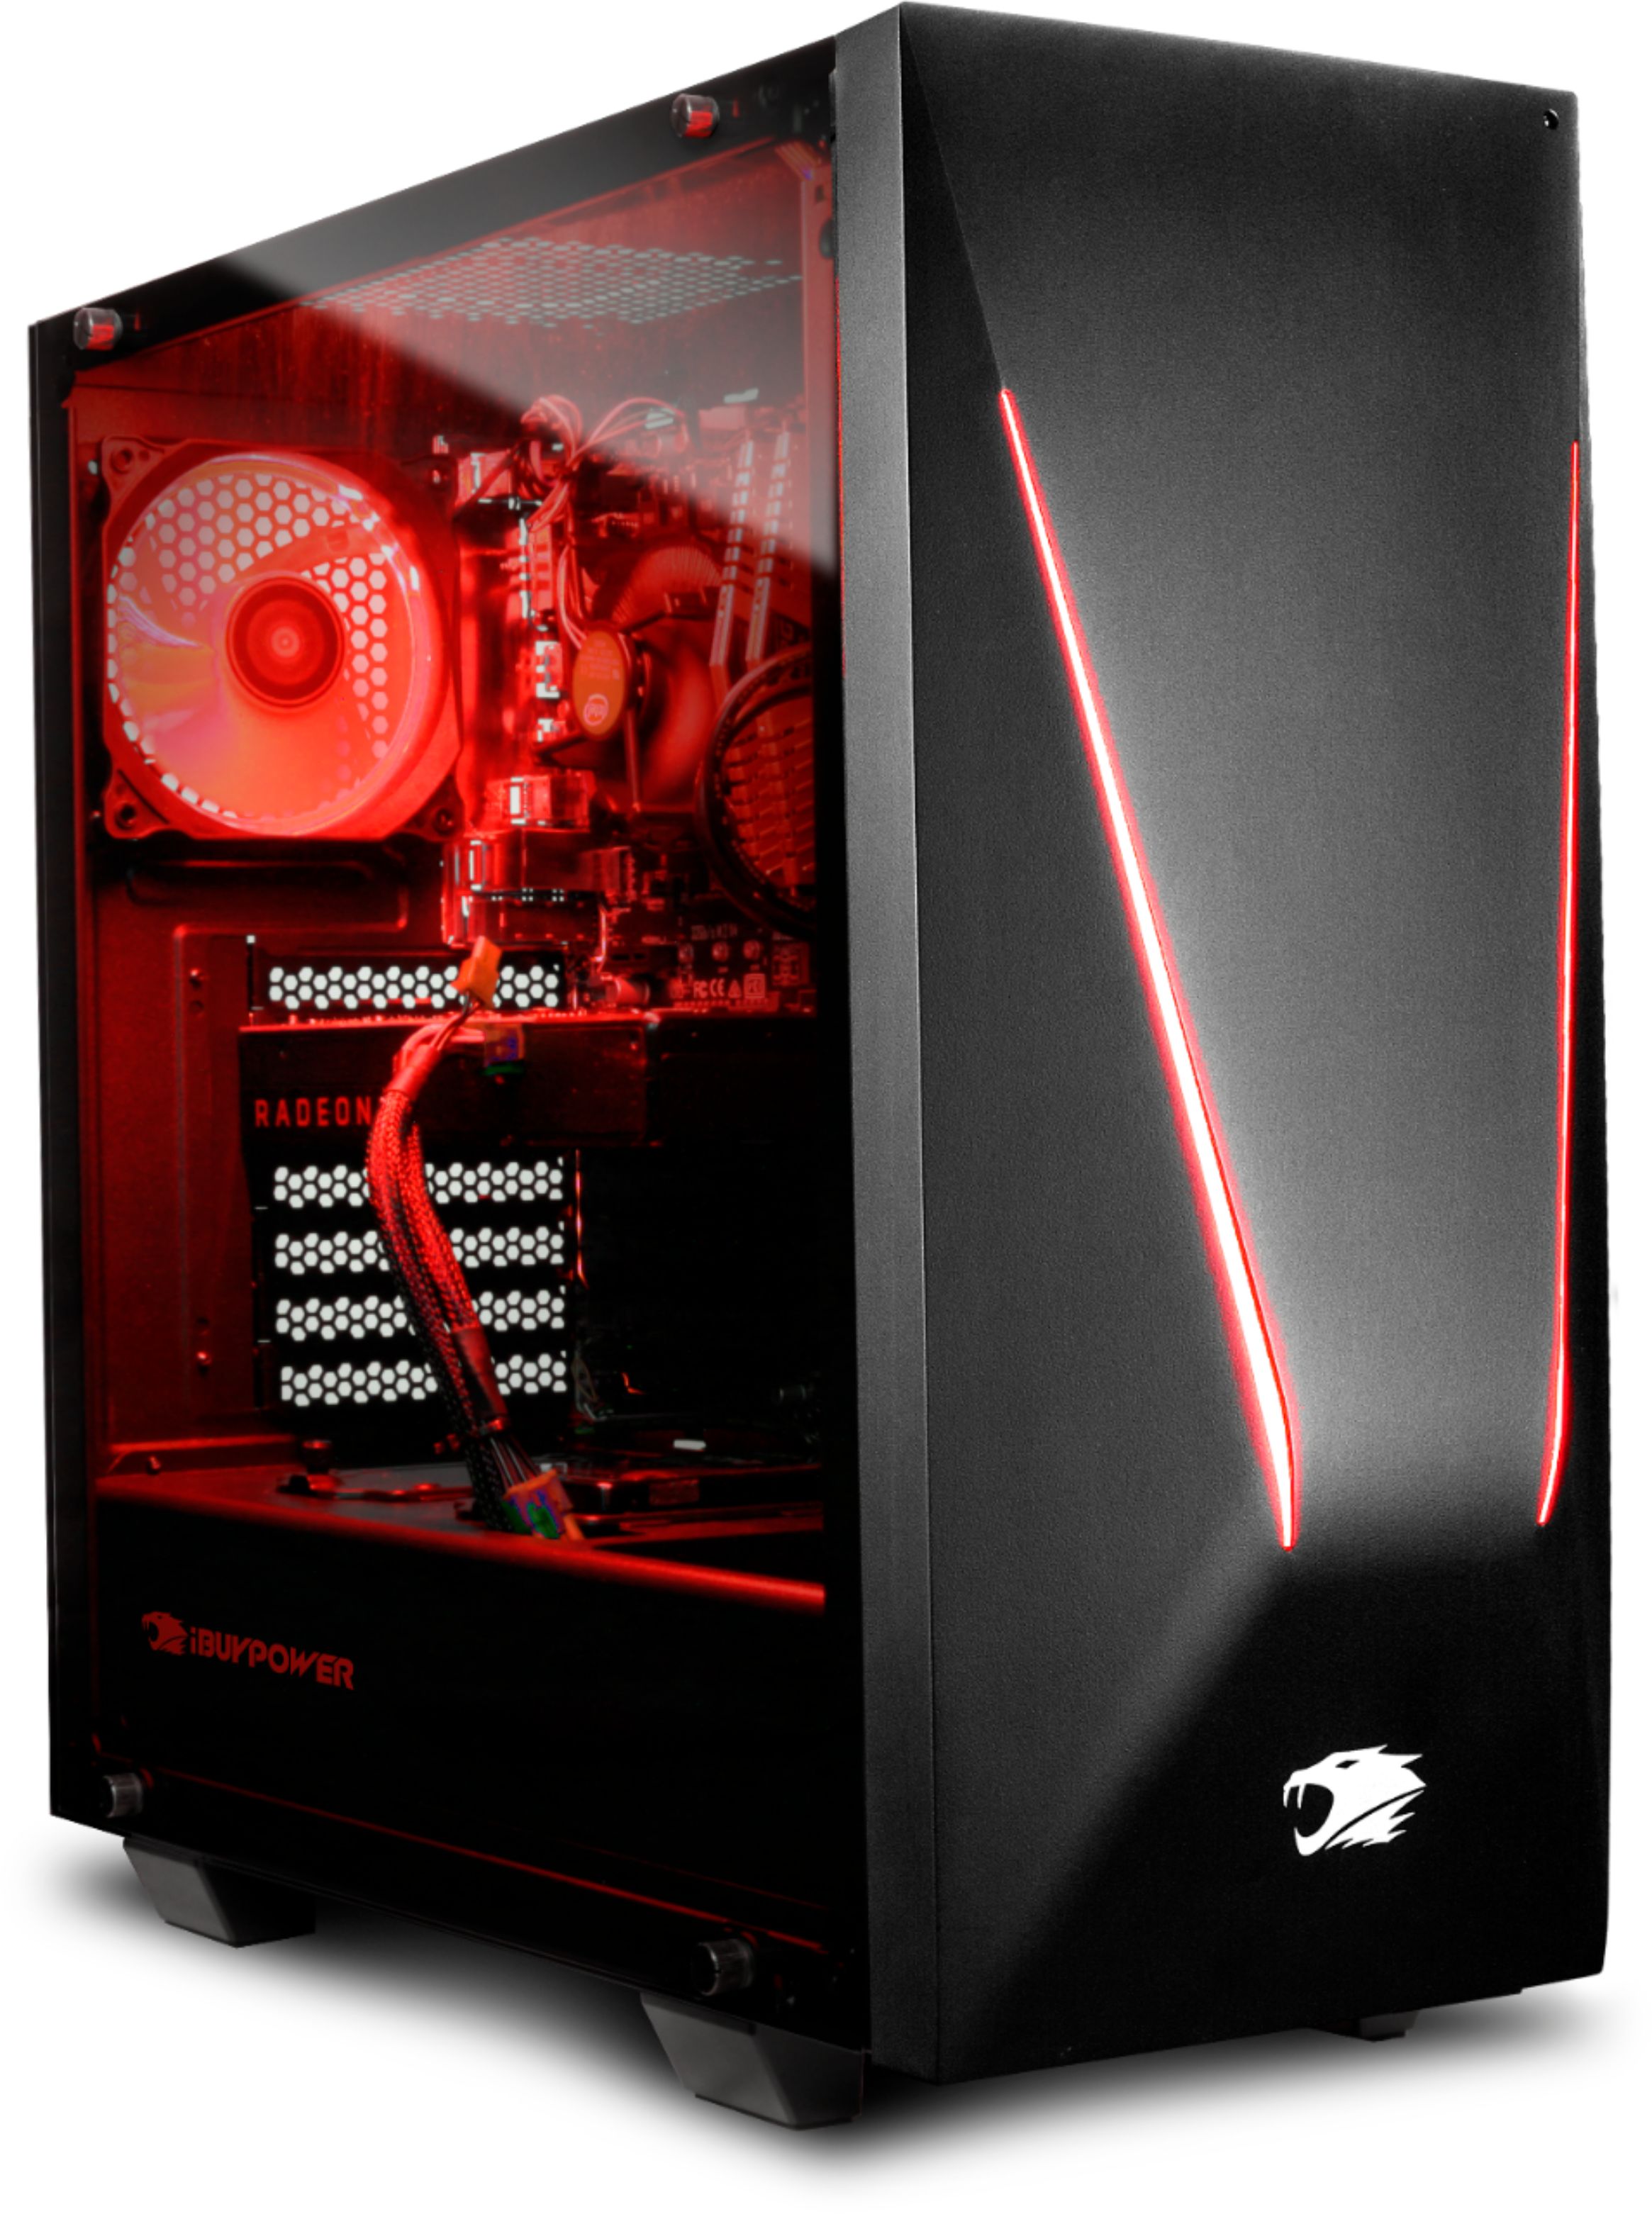 Questions And Answers Ibuypower Gaming Desktop Intel Core I7 8700 16gb